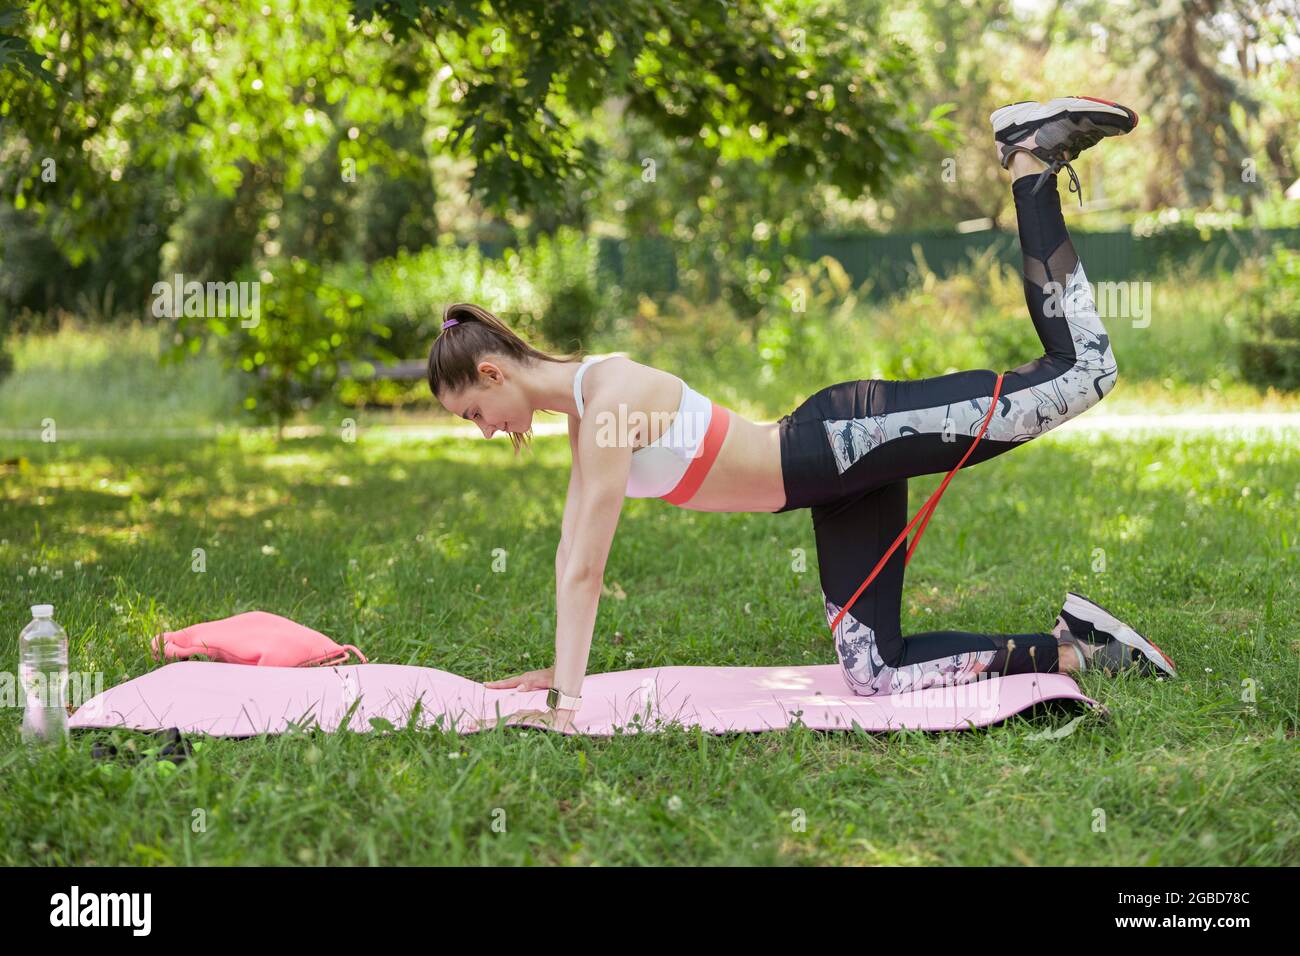 Sportswoman does back leg lift with elastic band kneeling on lawn grass Stock Photo